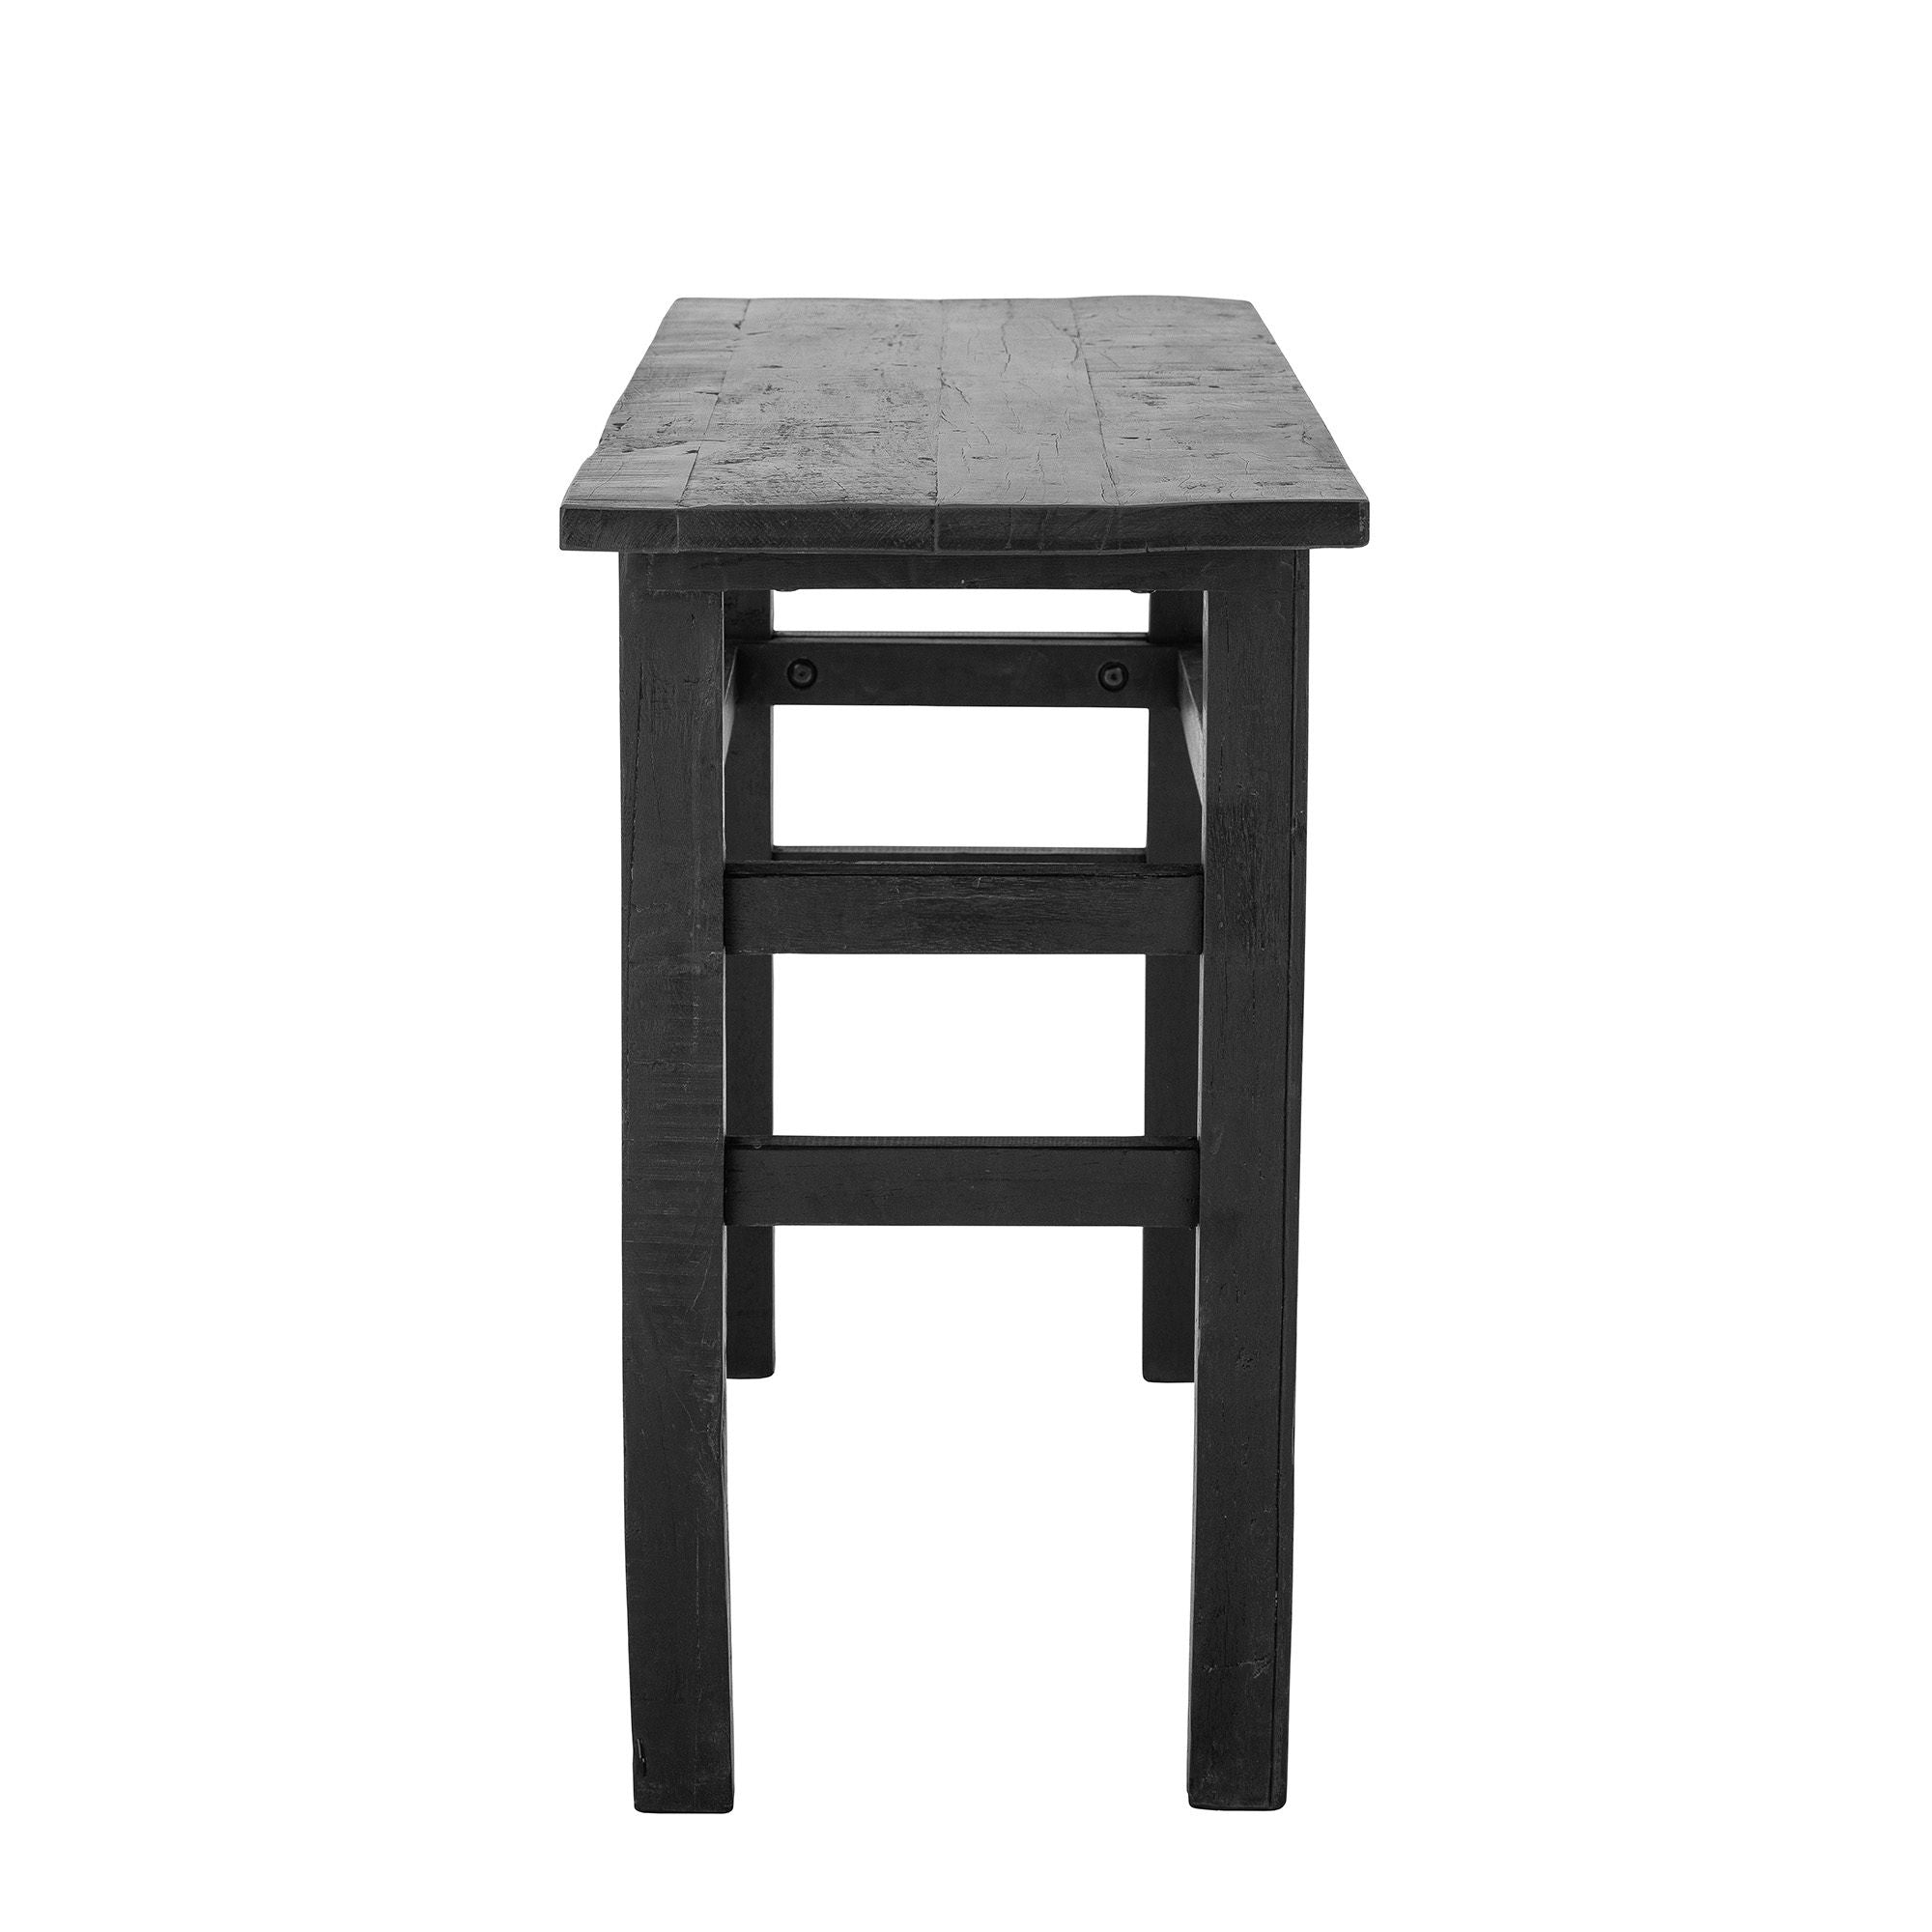 Bloomingville Riber Console Table, Black, Reclaimed Wood